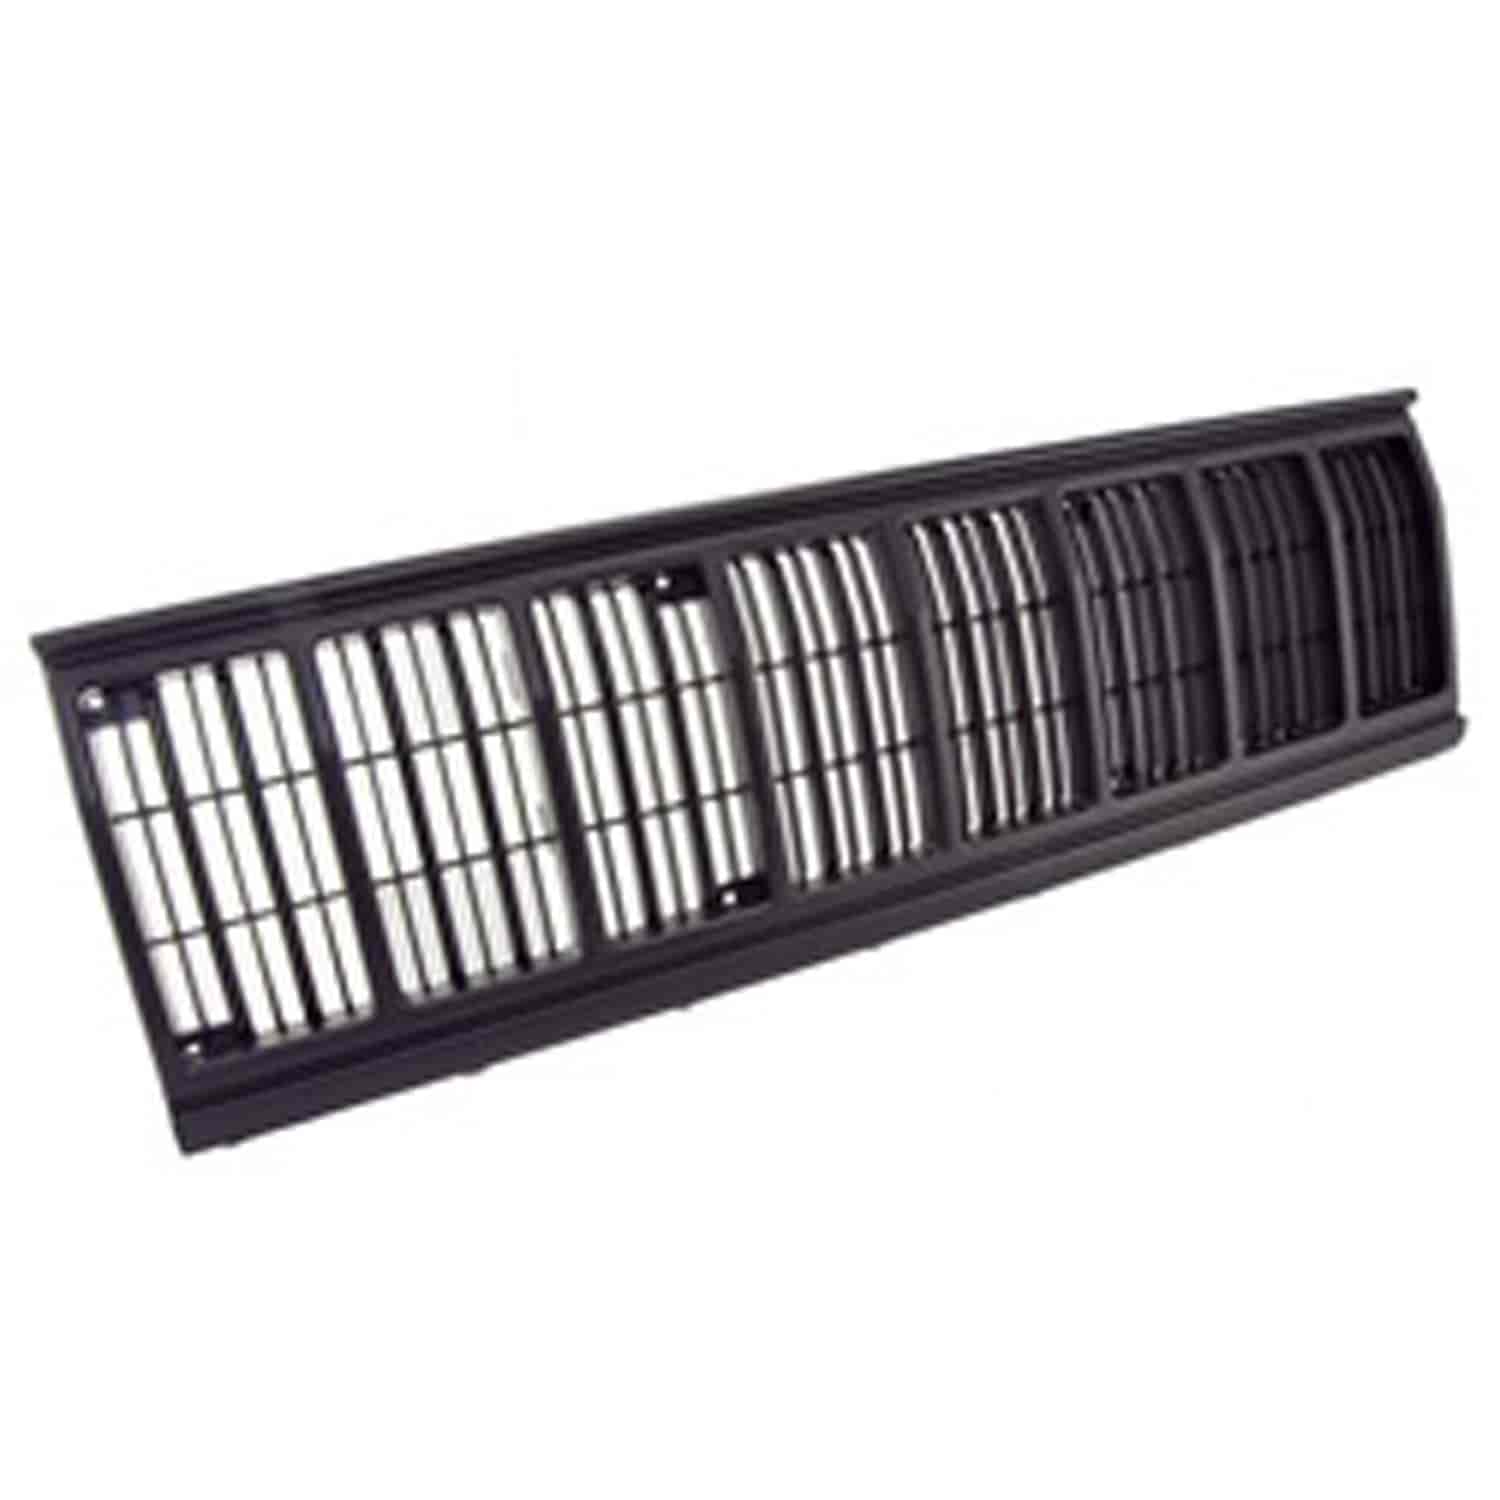 This black grille insert from Omix-ADA fits 93-96 Jeep Cherokee XJ.